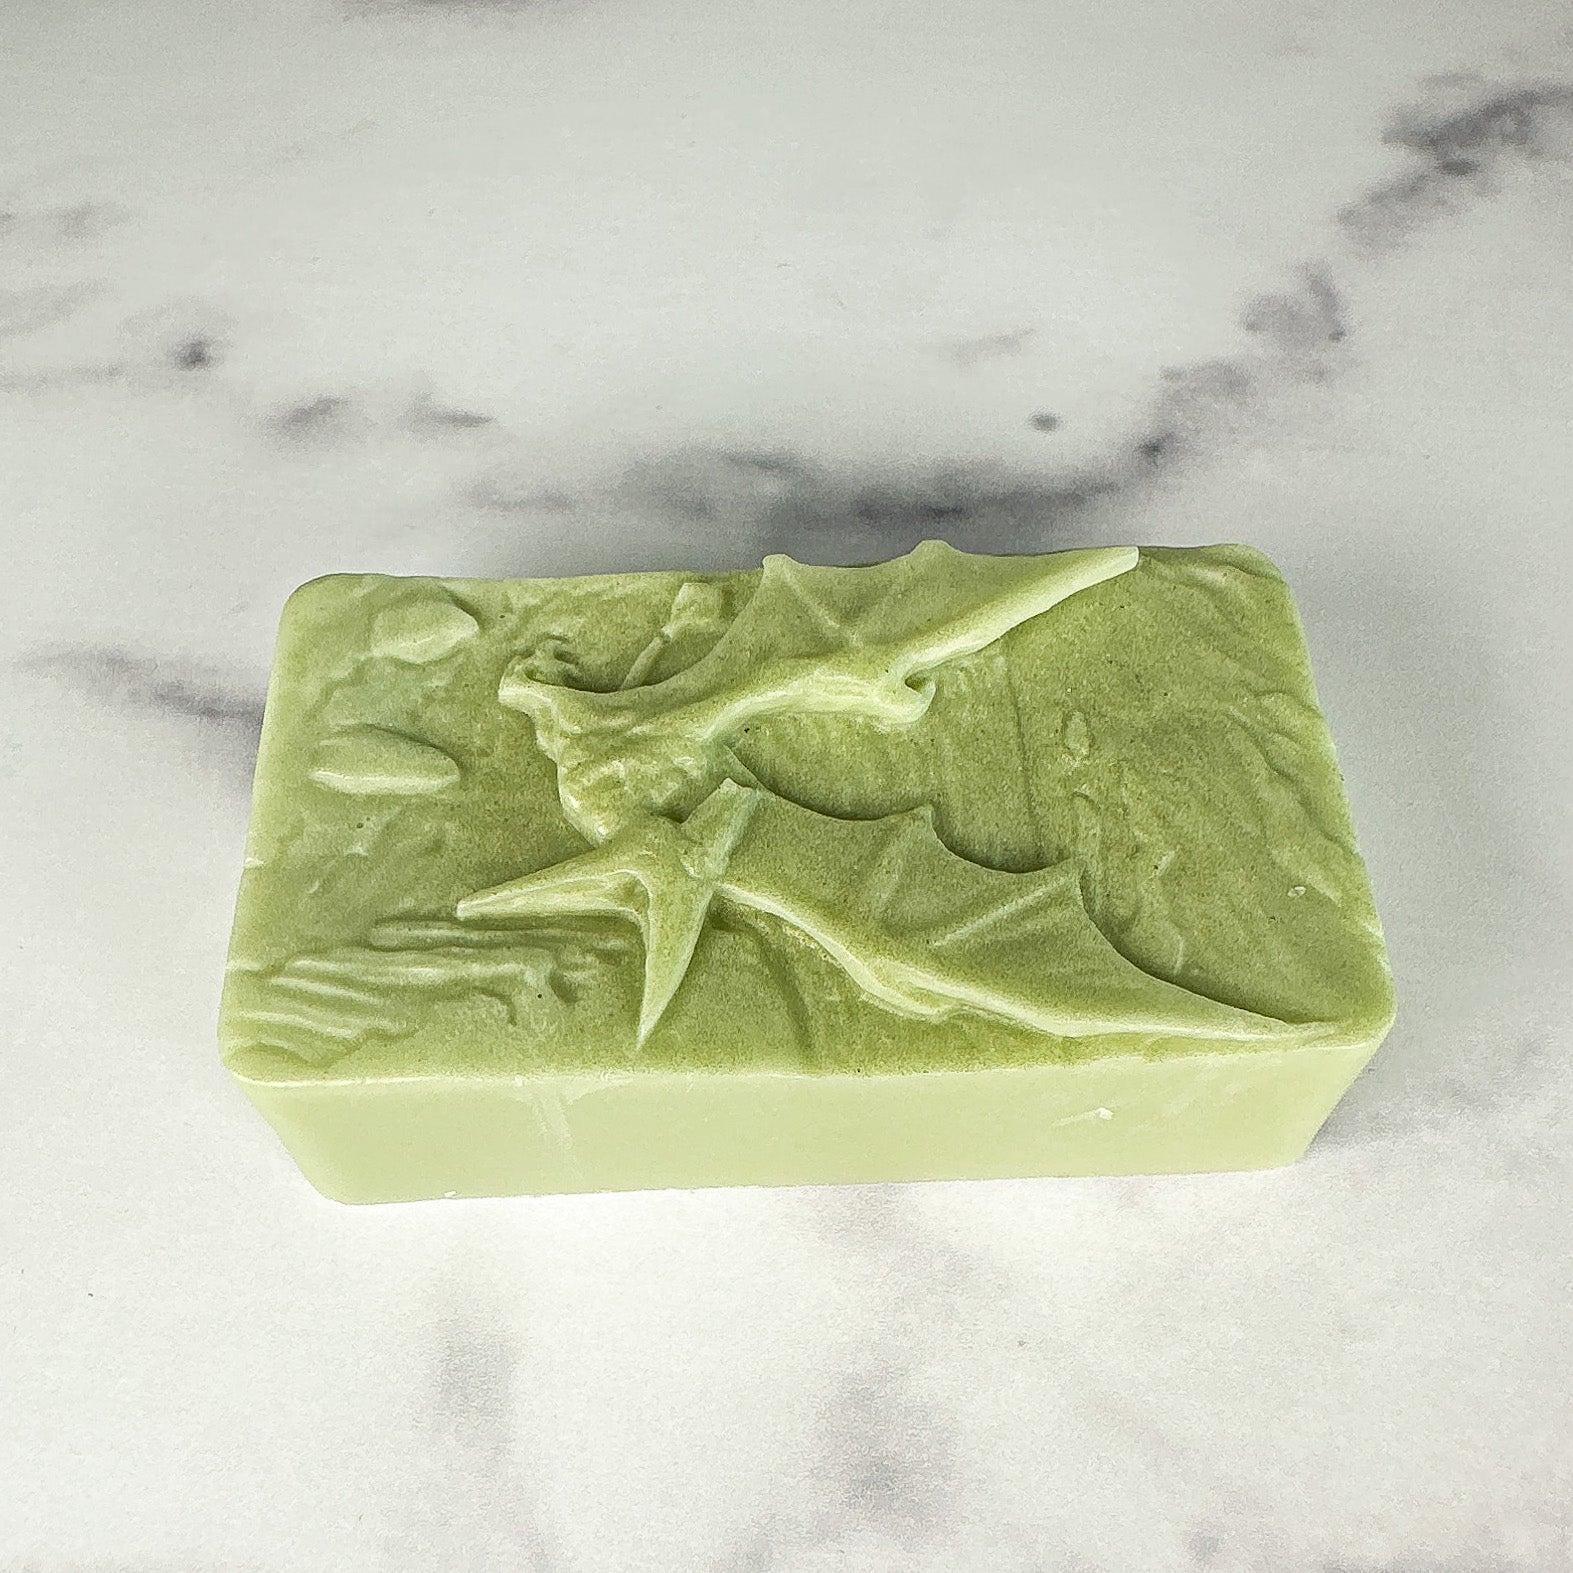 Pterodactyl Soap Bar - The Serpentry